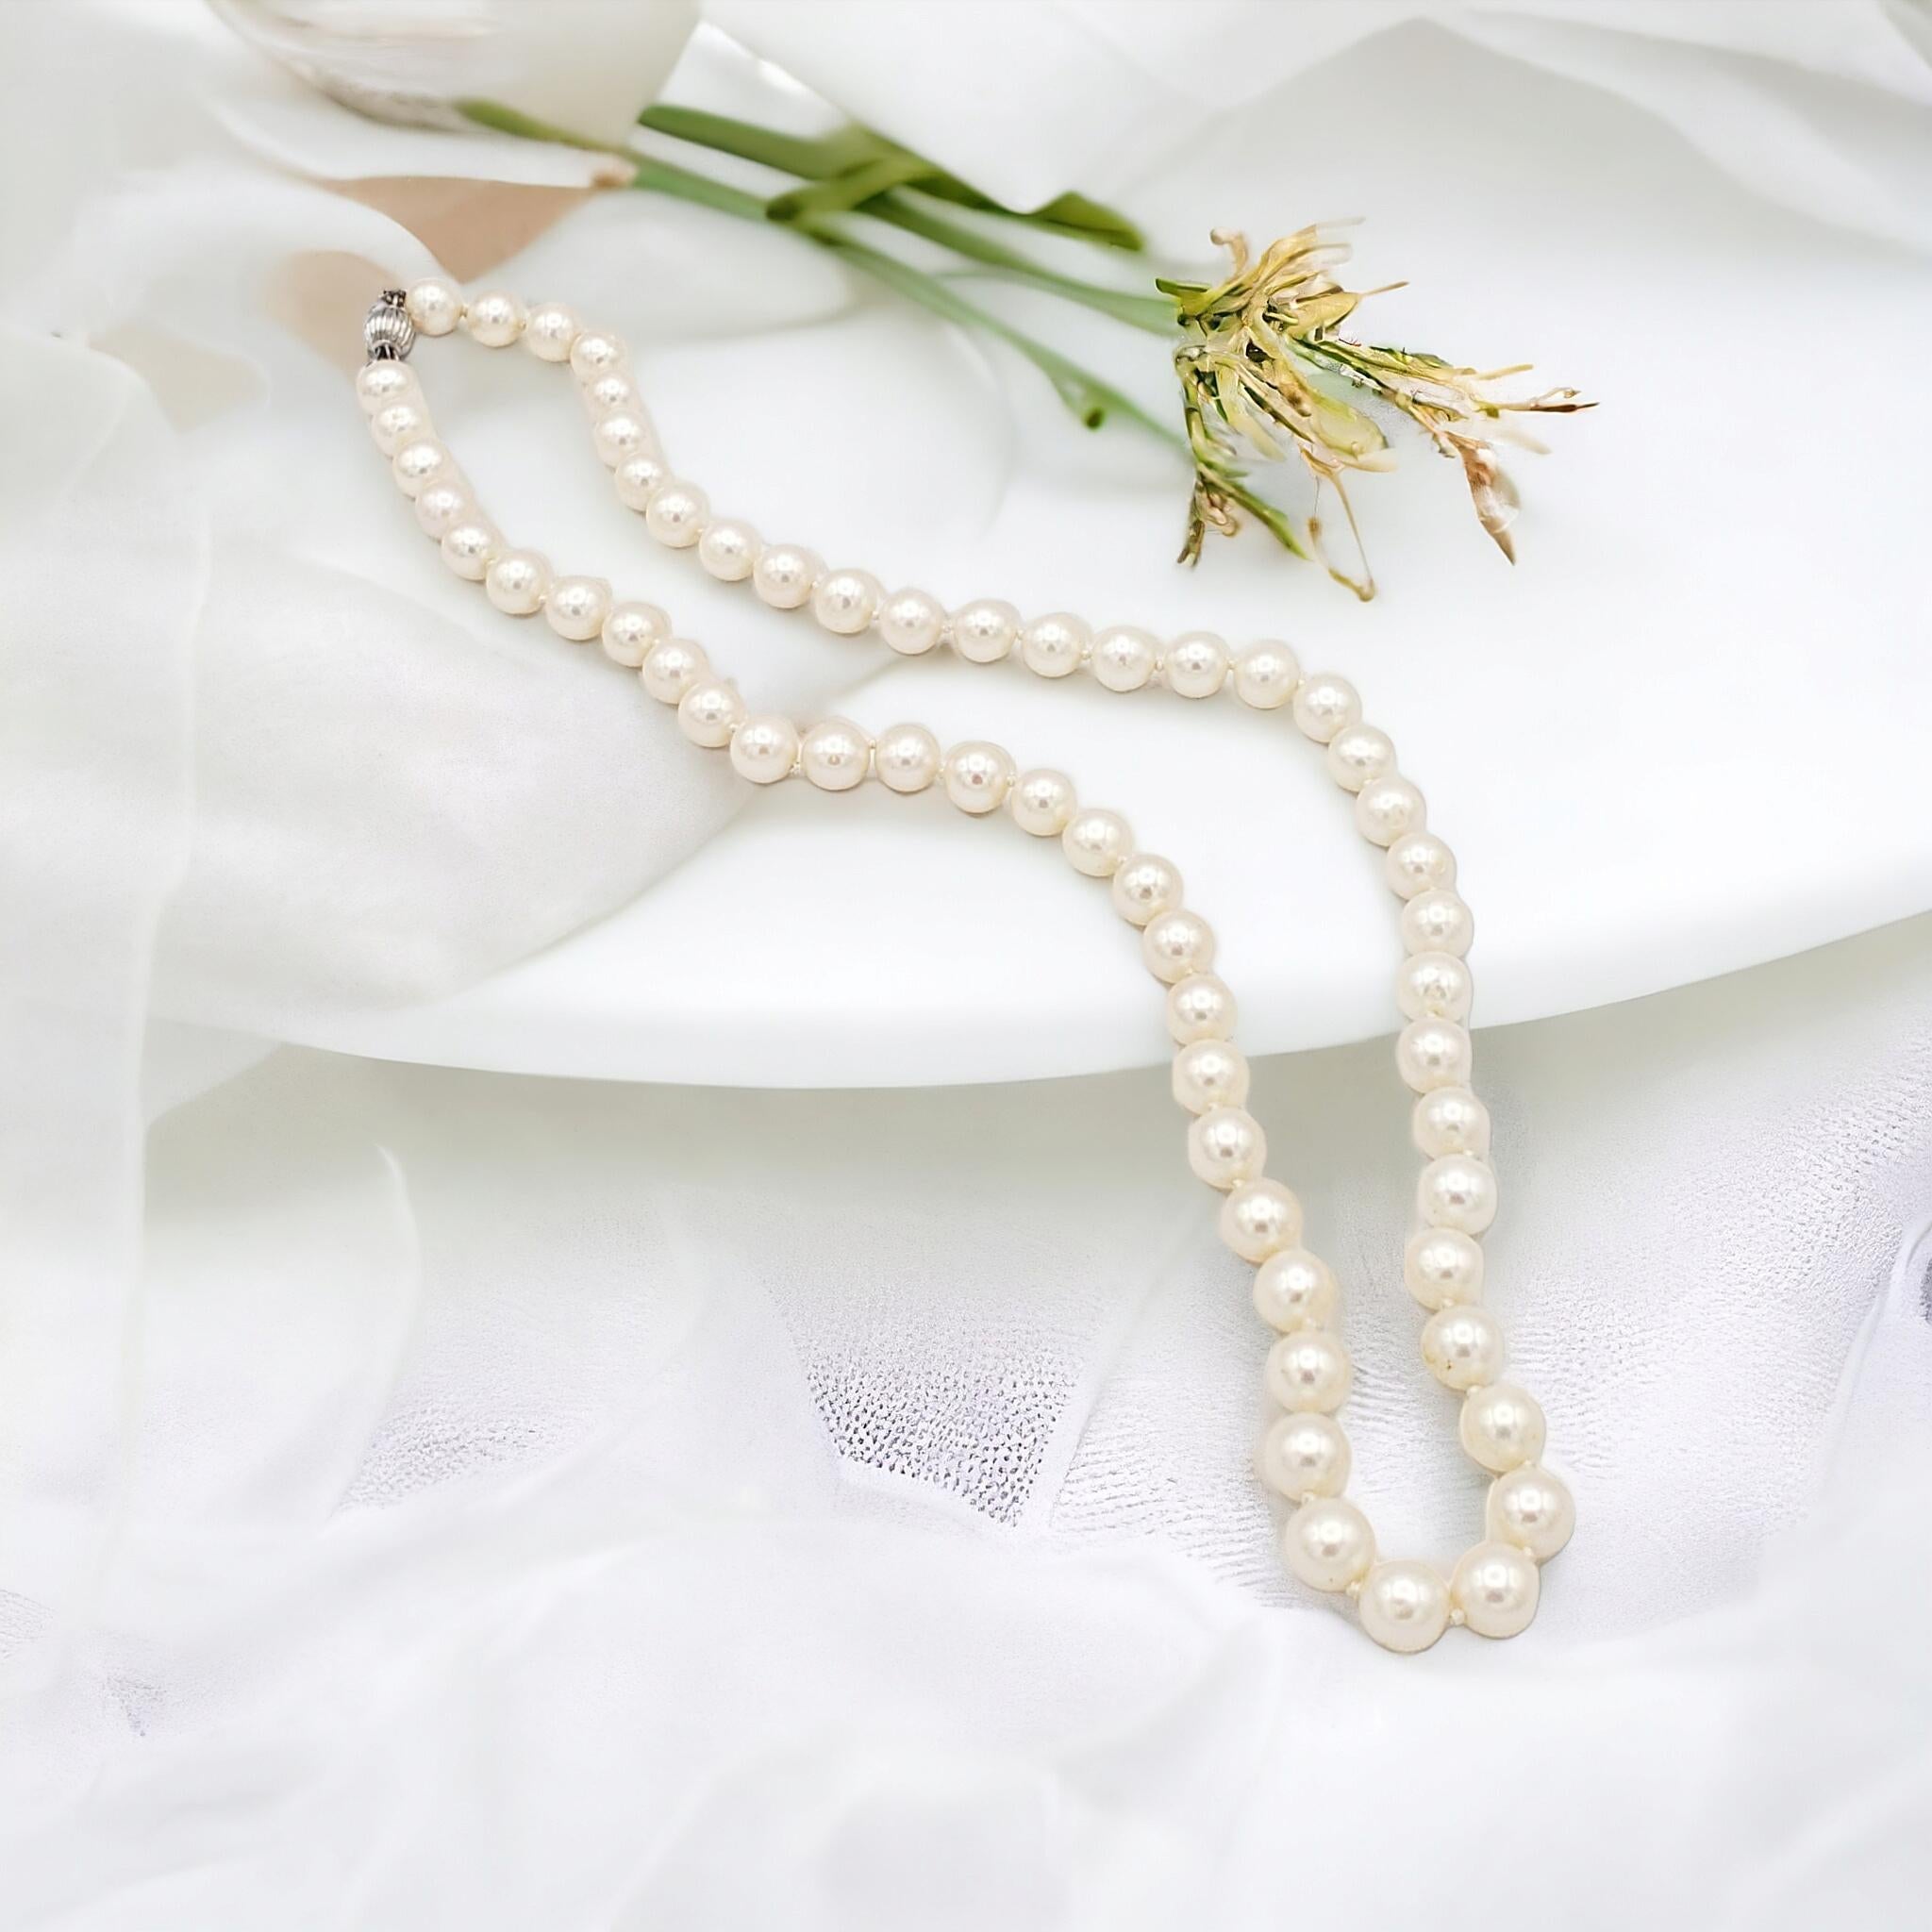 NEW Certified AA+ Quality Japanese Akoya Salt Water White Pearl Necklace For Sale 13